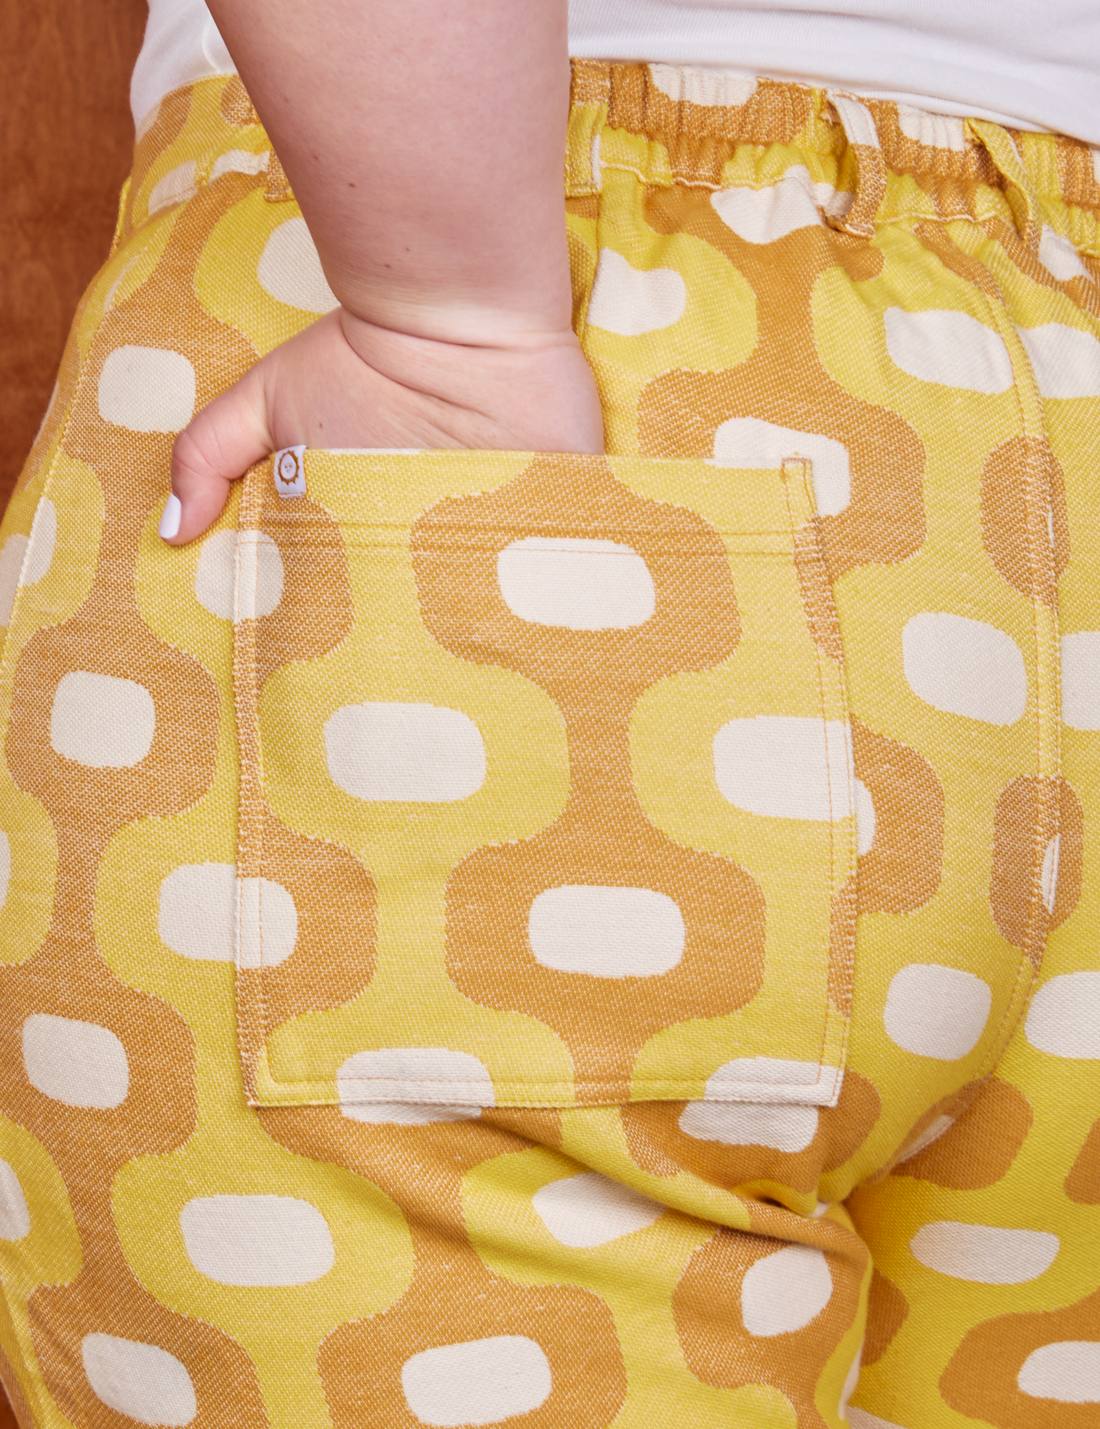 Back pocket close up of Western Pants in Yellow Jacquard. Ashley has her hand in the pocket.